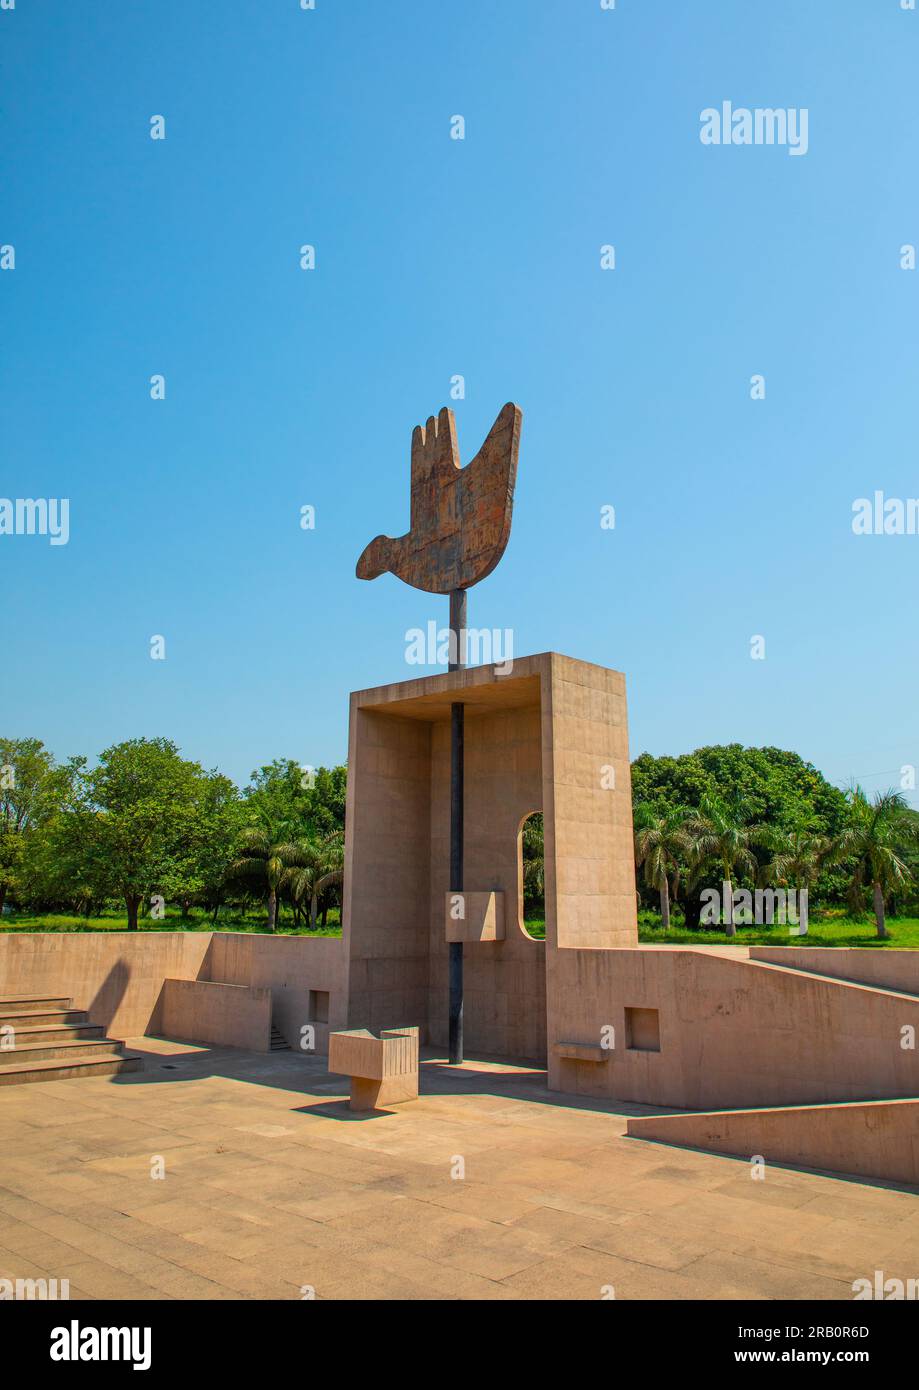 The open hand monument in the goverment district by Le Corbusier, Punjab State, Chandigarh, India Stock Photo